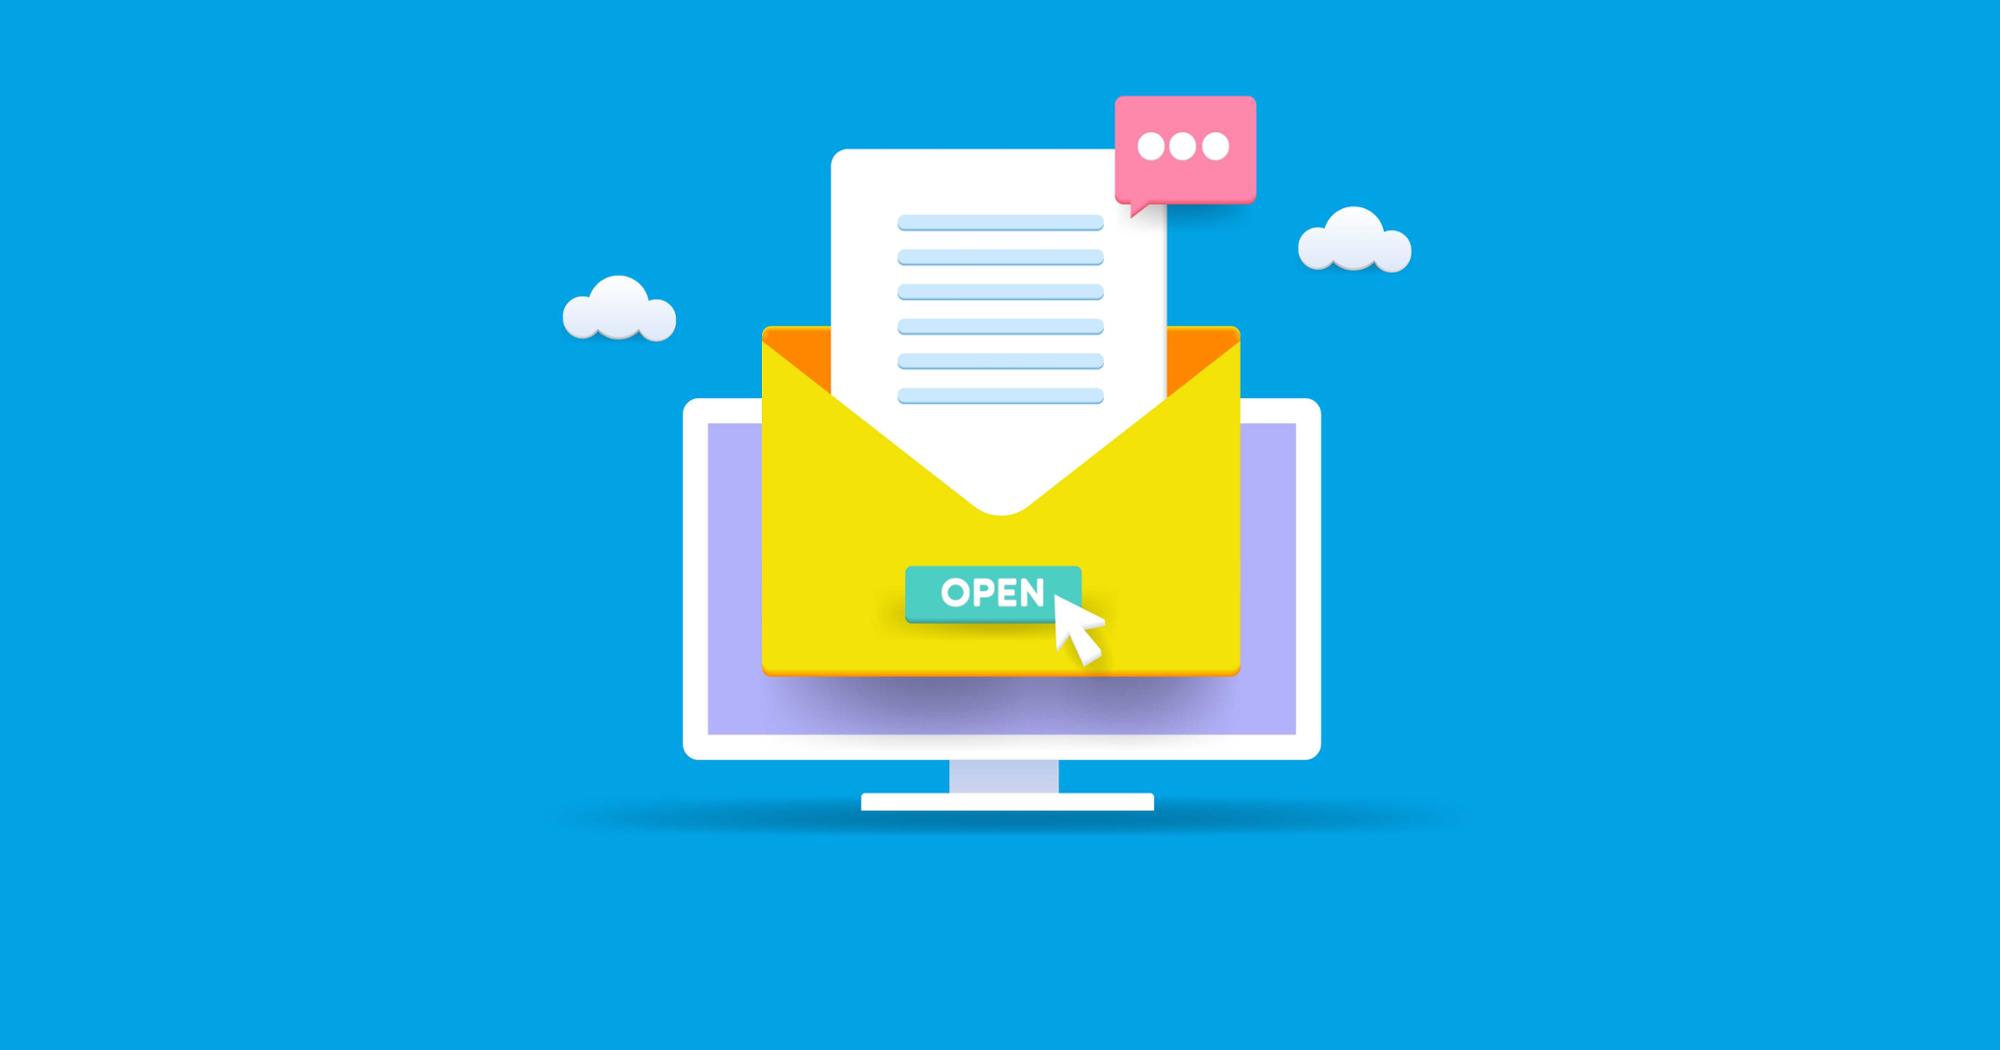 An email illustration with a blue background.